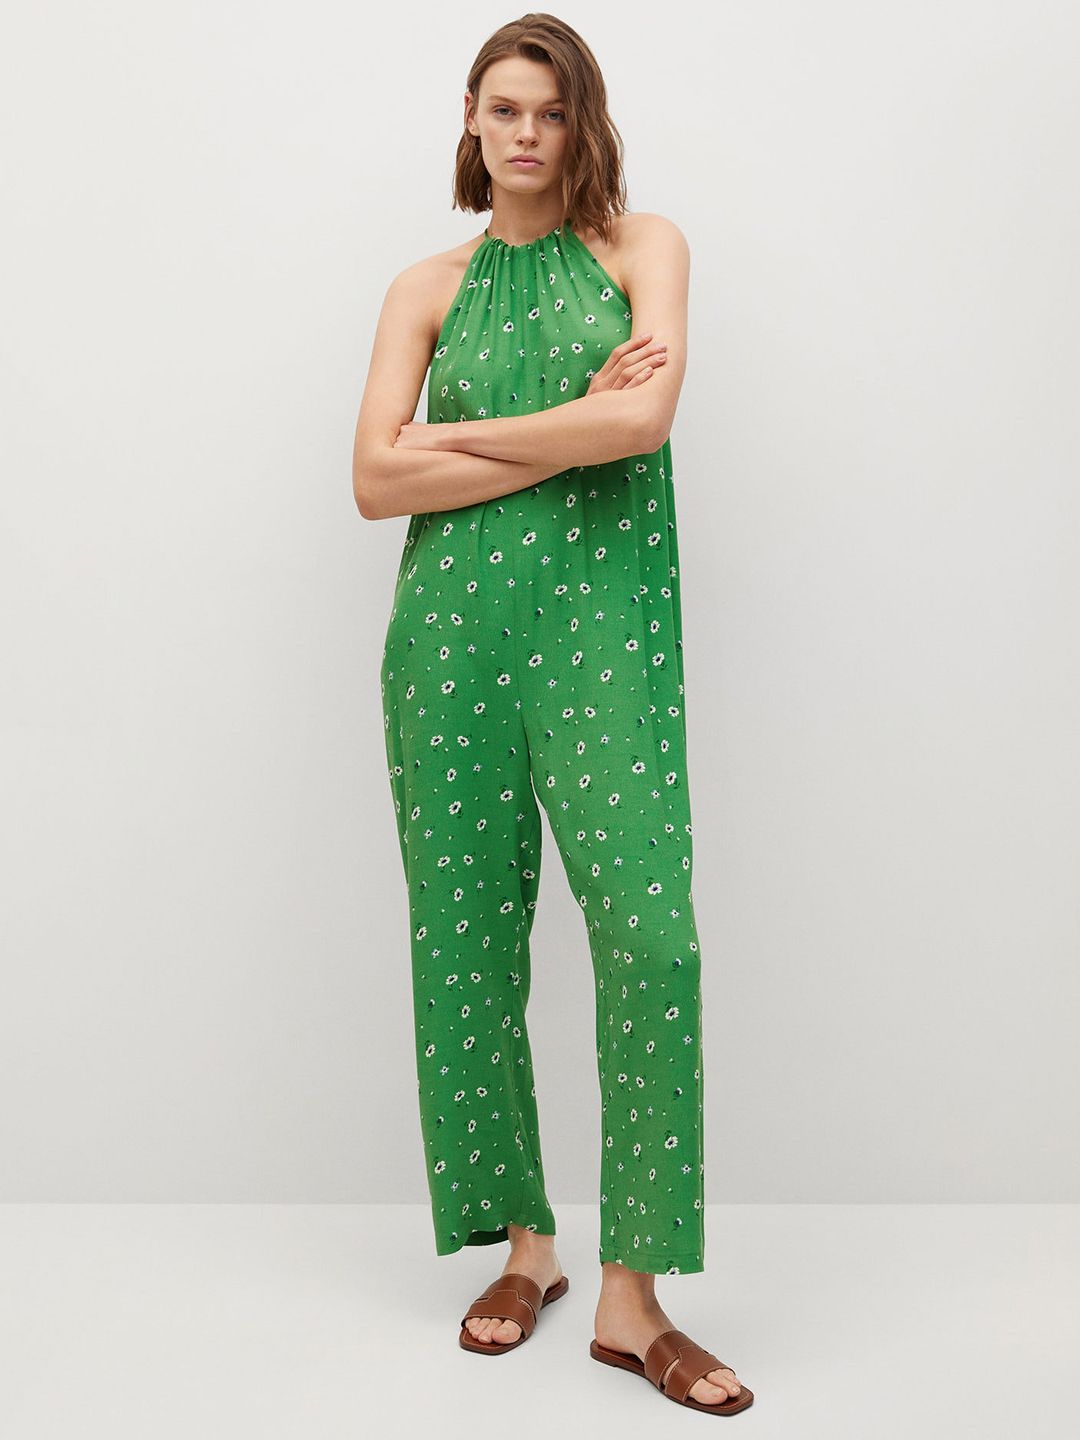 MANGO Green & White Halter Neck Floral Printed Basic Jumpsuit Price in India